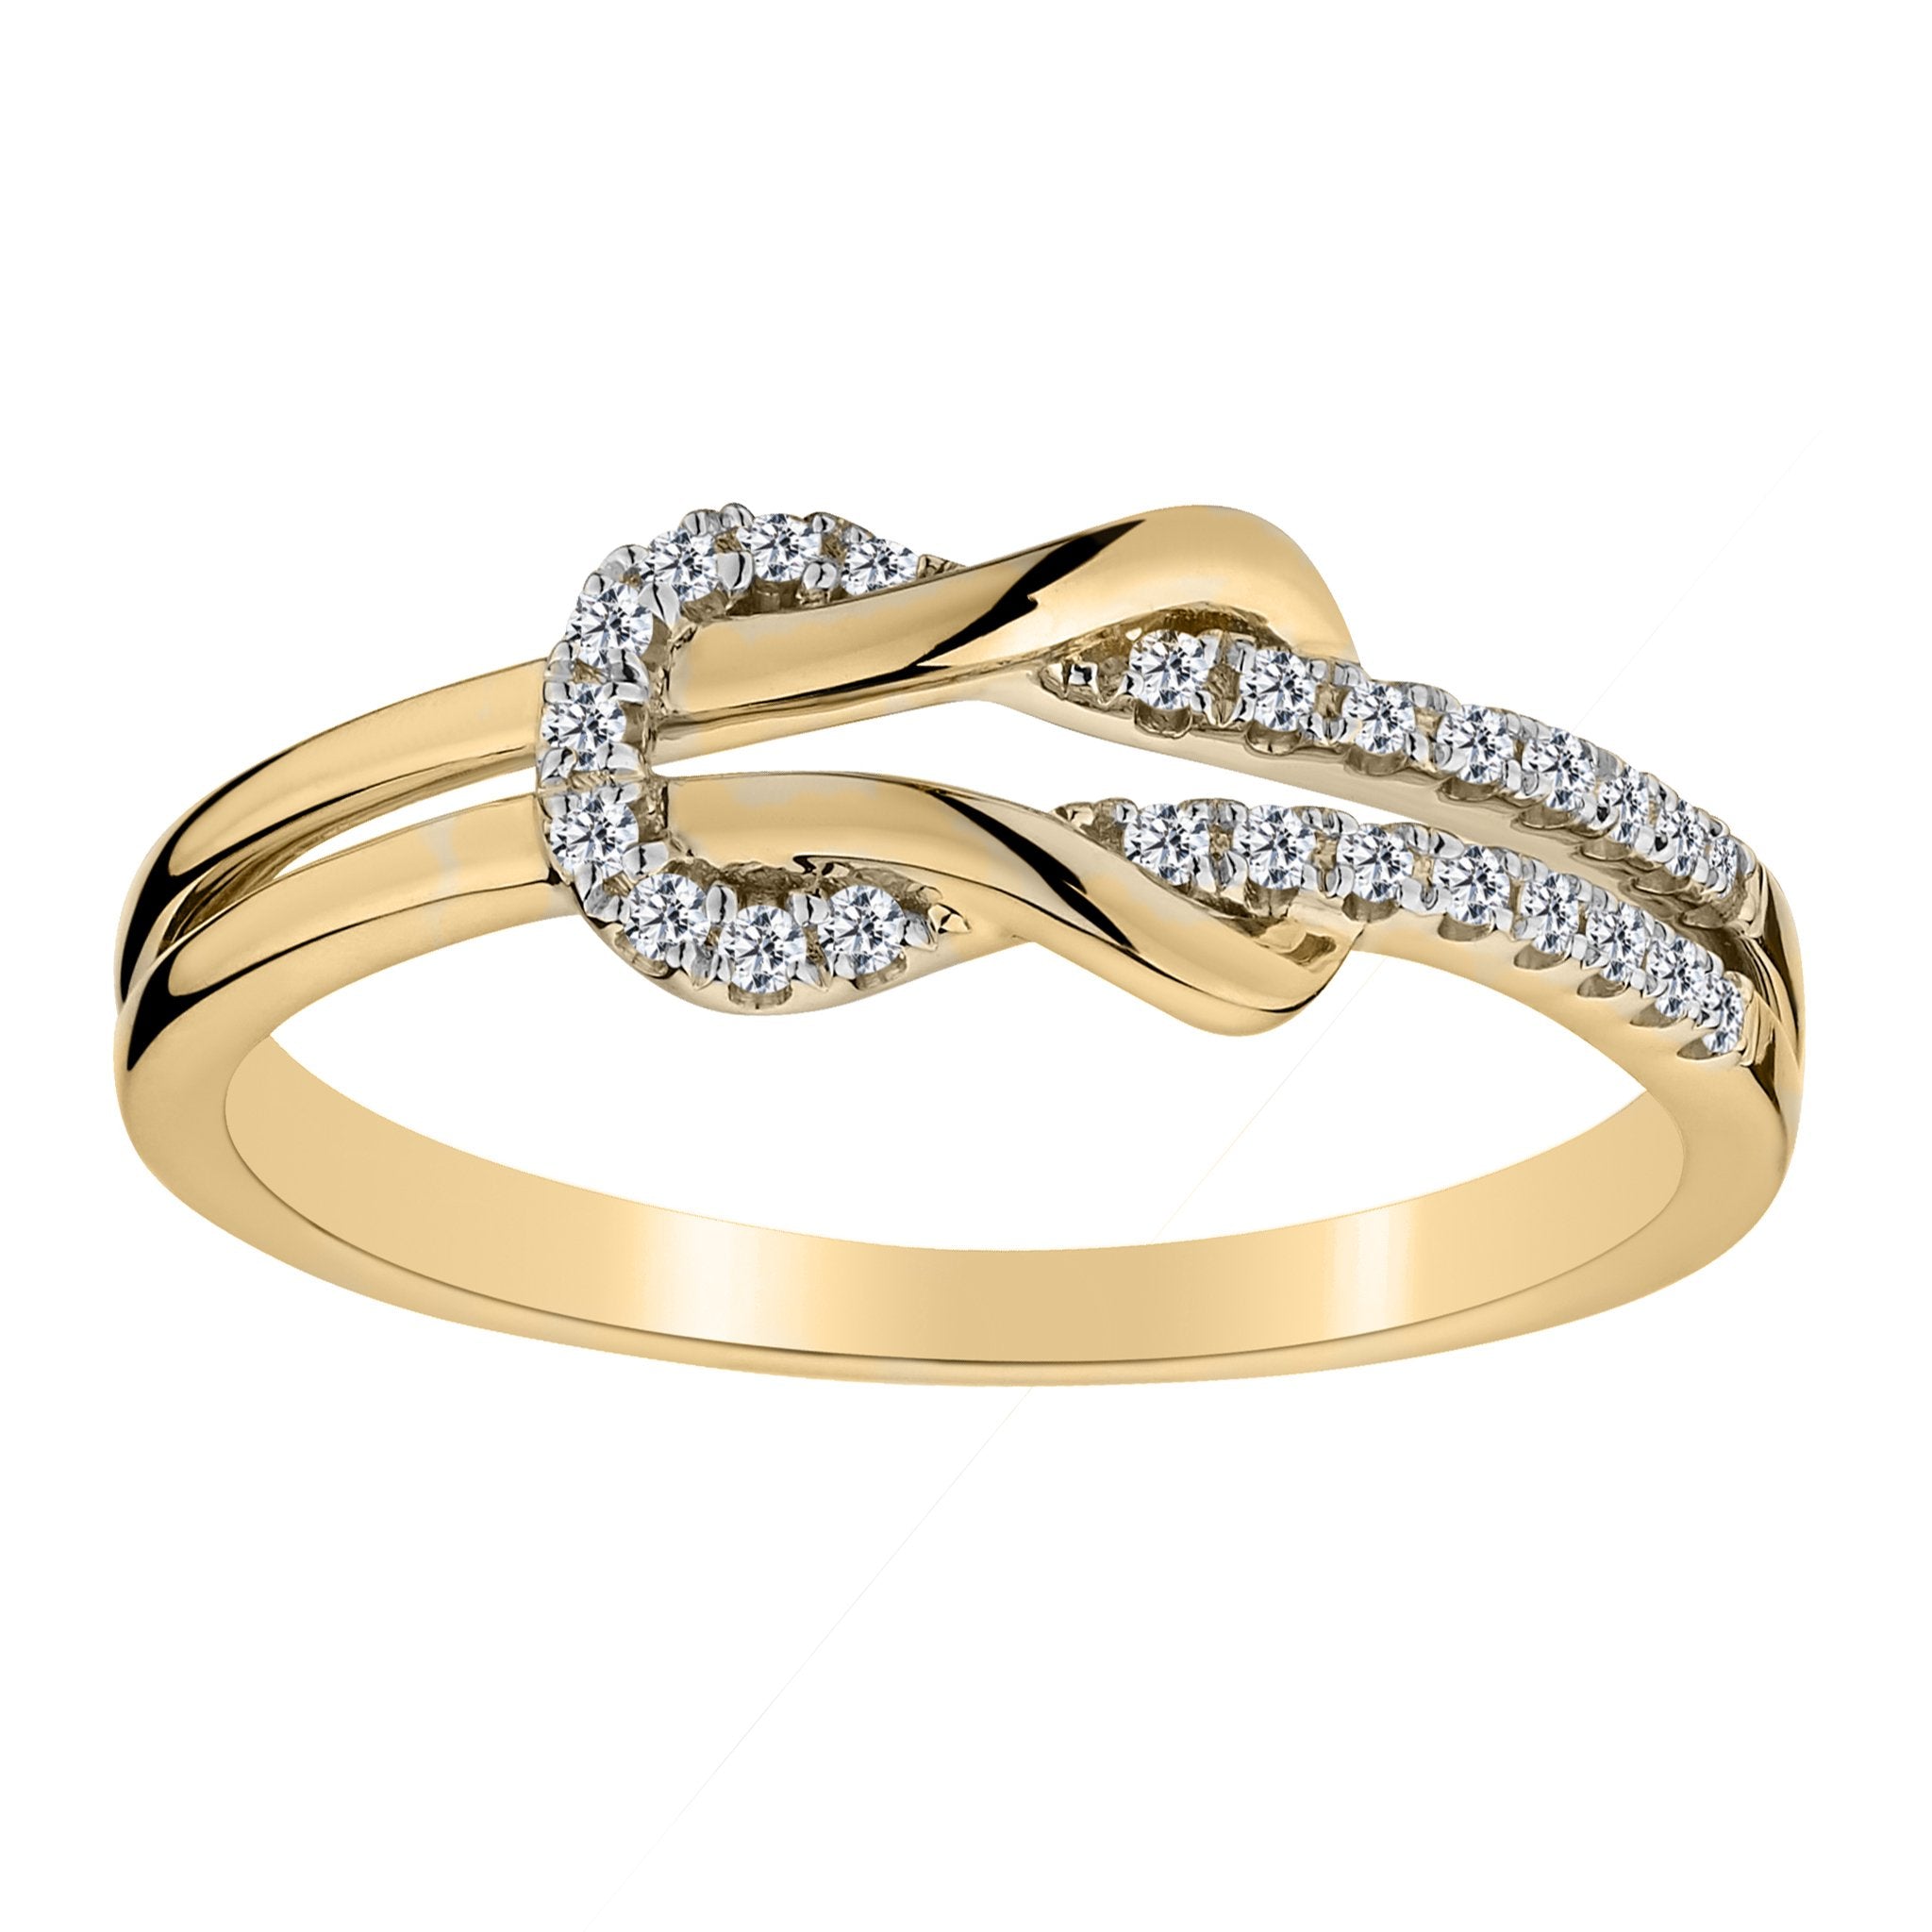 .12 CARAT DIAMOND RING, 10kt YELLOW GOLD. Fashion Rings - Griffin Jewellery Designs